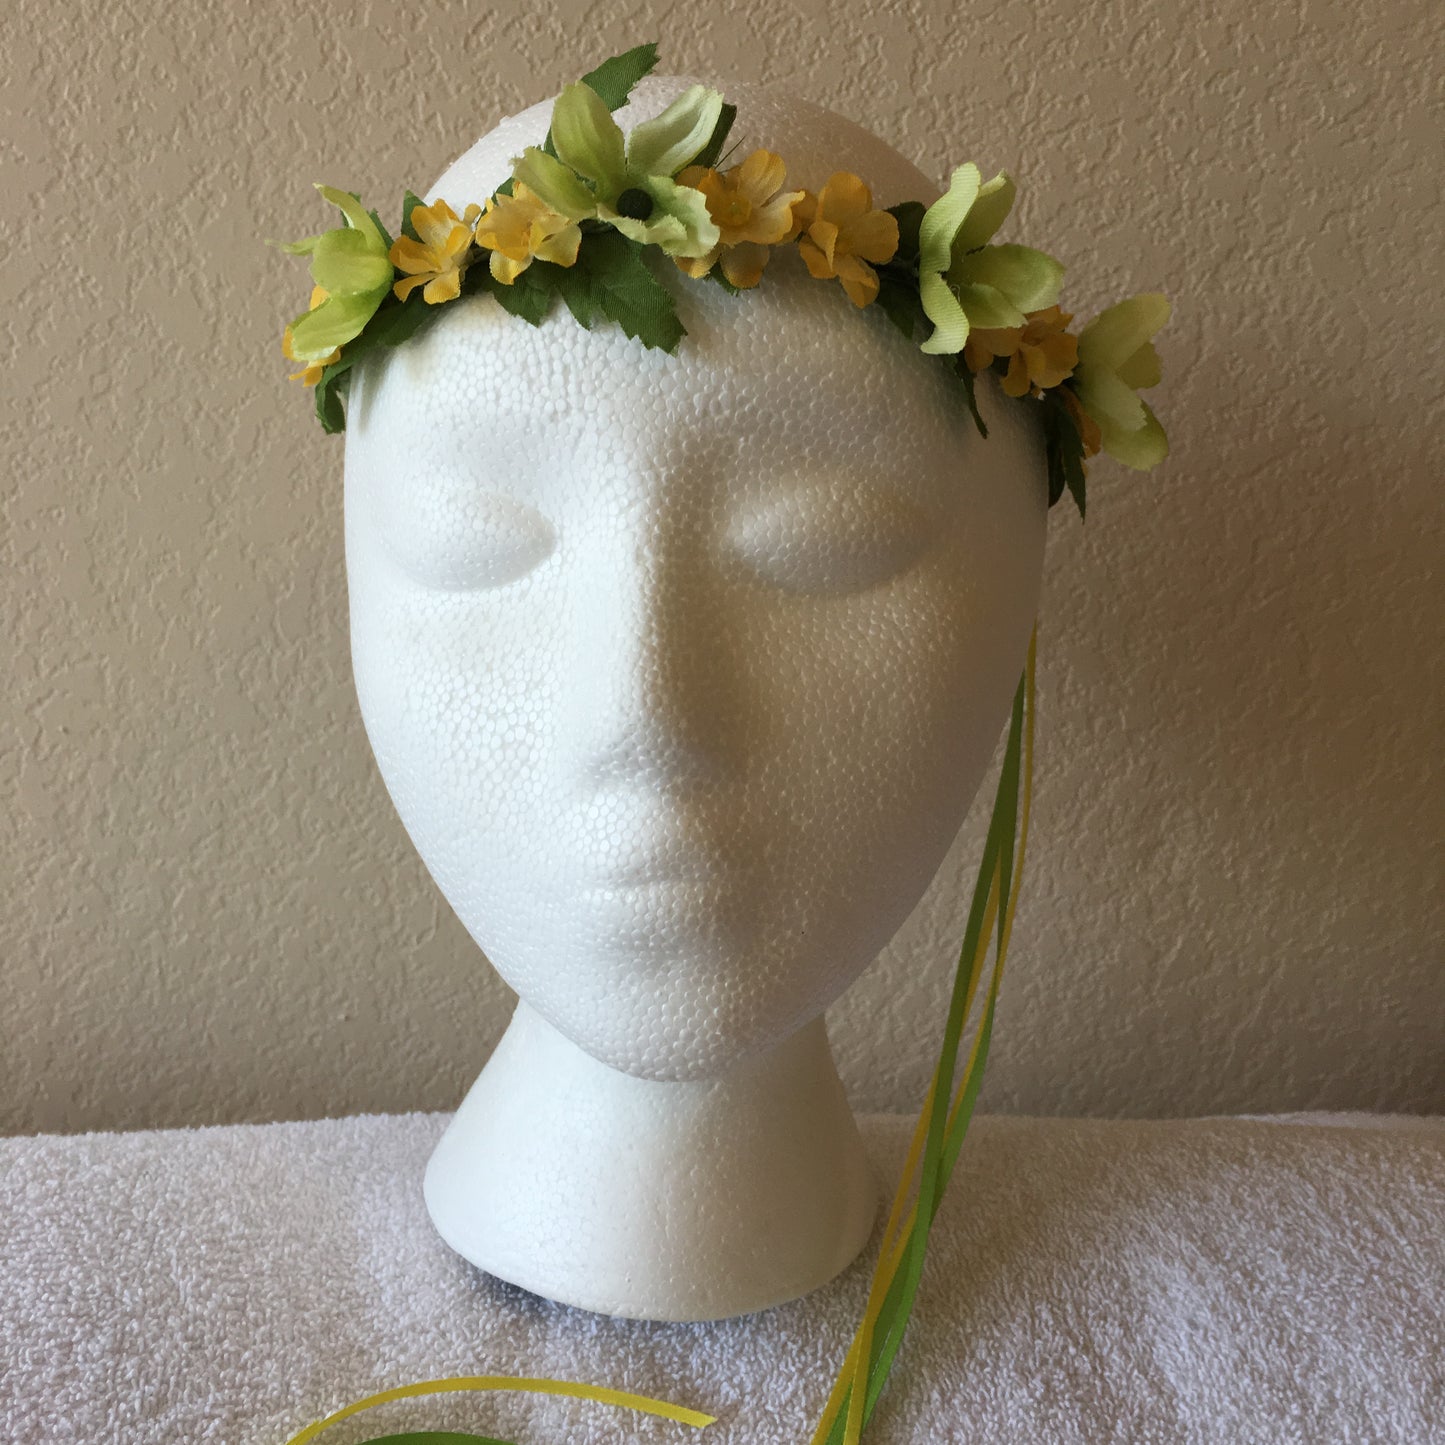 Extra Small Wreath - Lime green flowers w/ yellow accent flowers